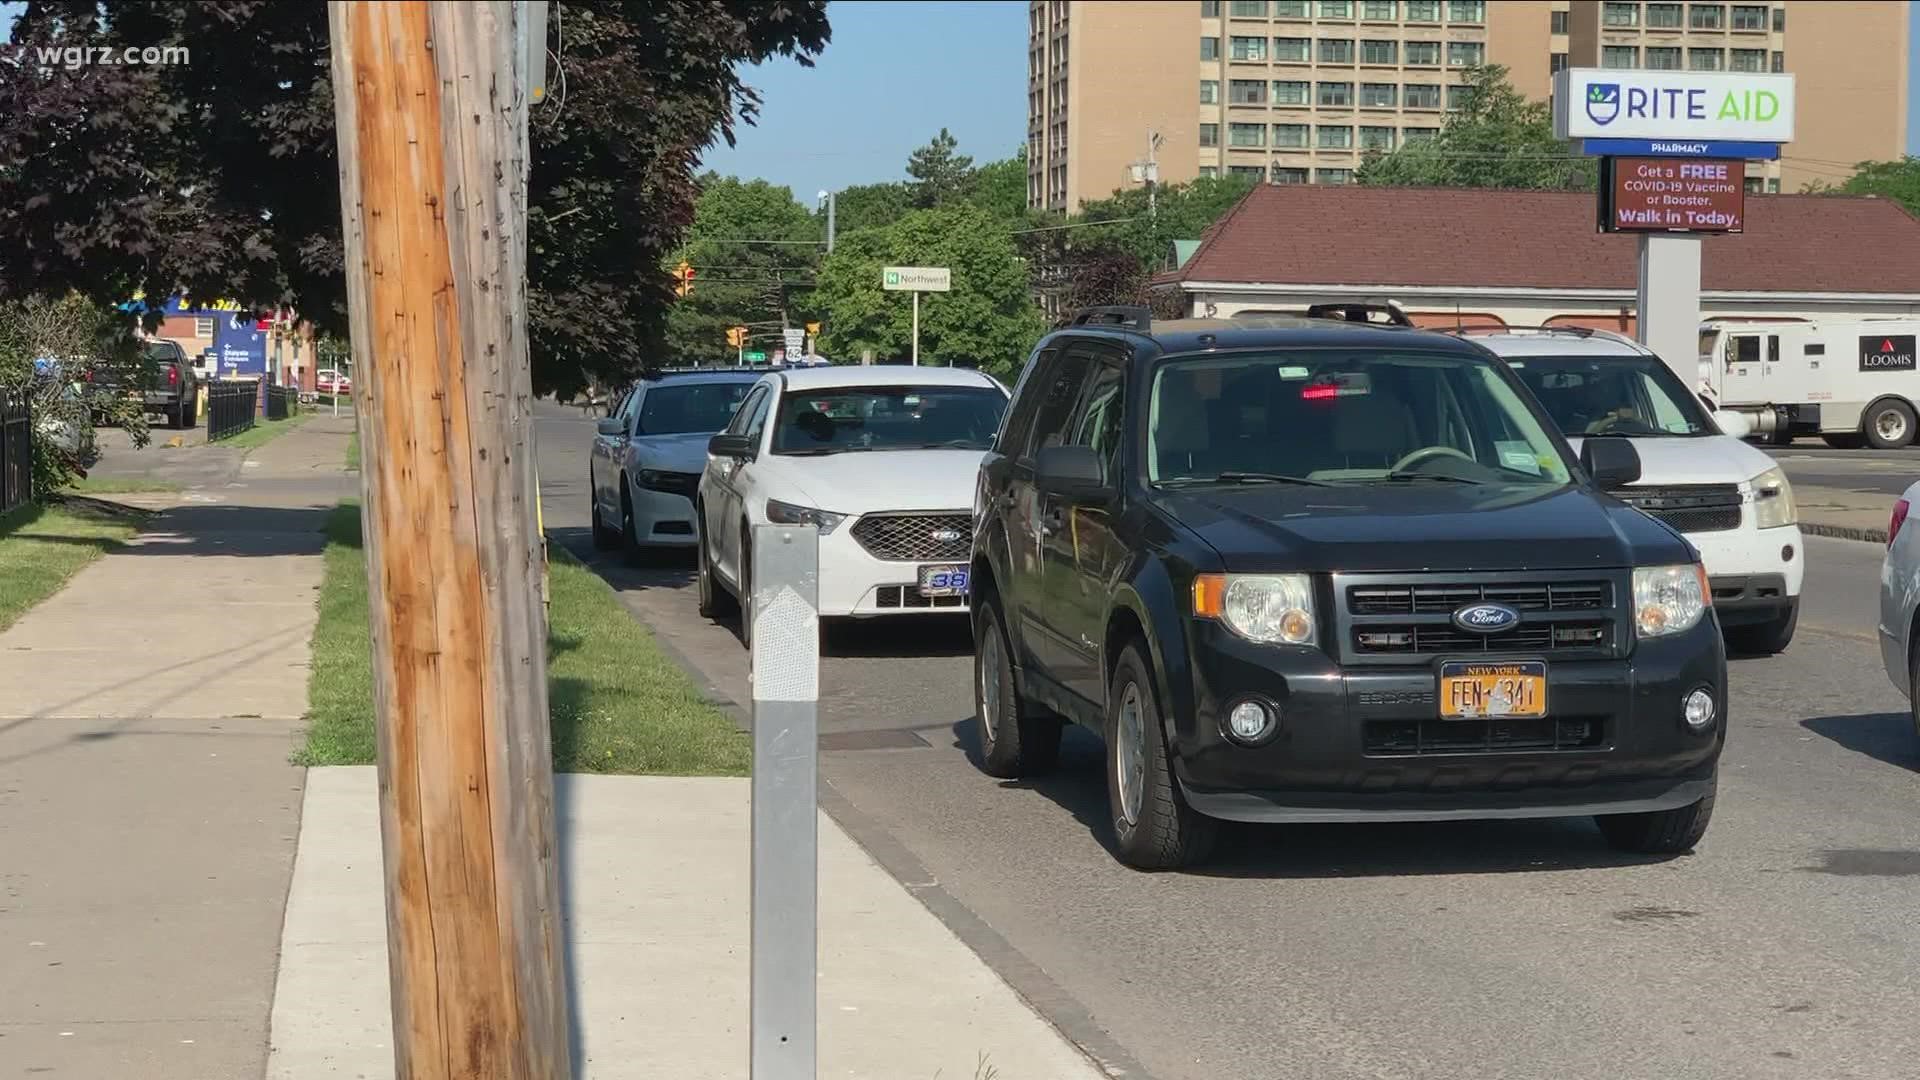 shots were fired between two cars on pine avenue between 7th and 10th street earlier today. One car was stopped by police, but they're still looking for the second